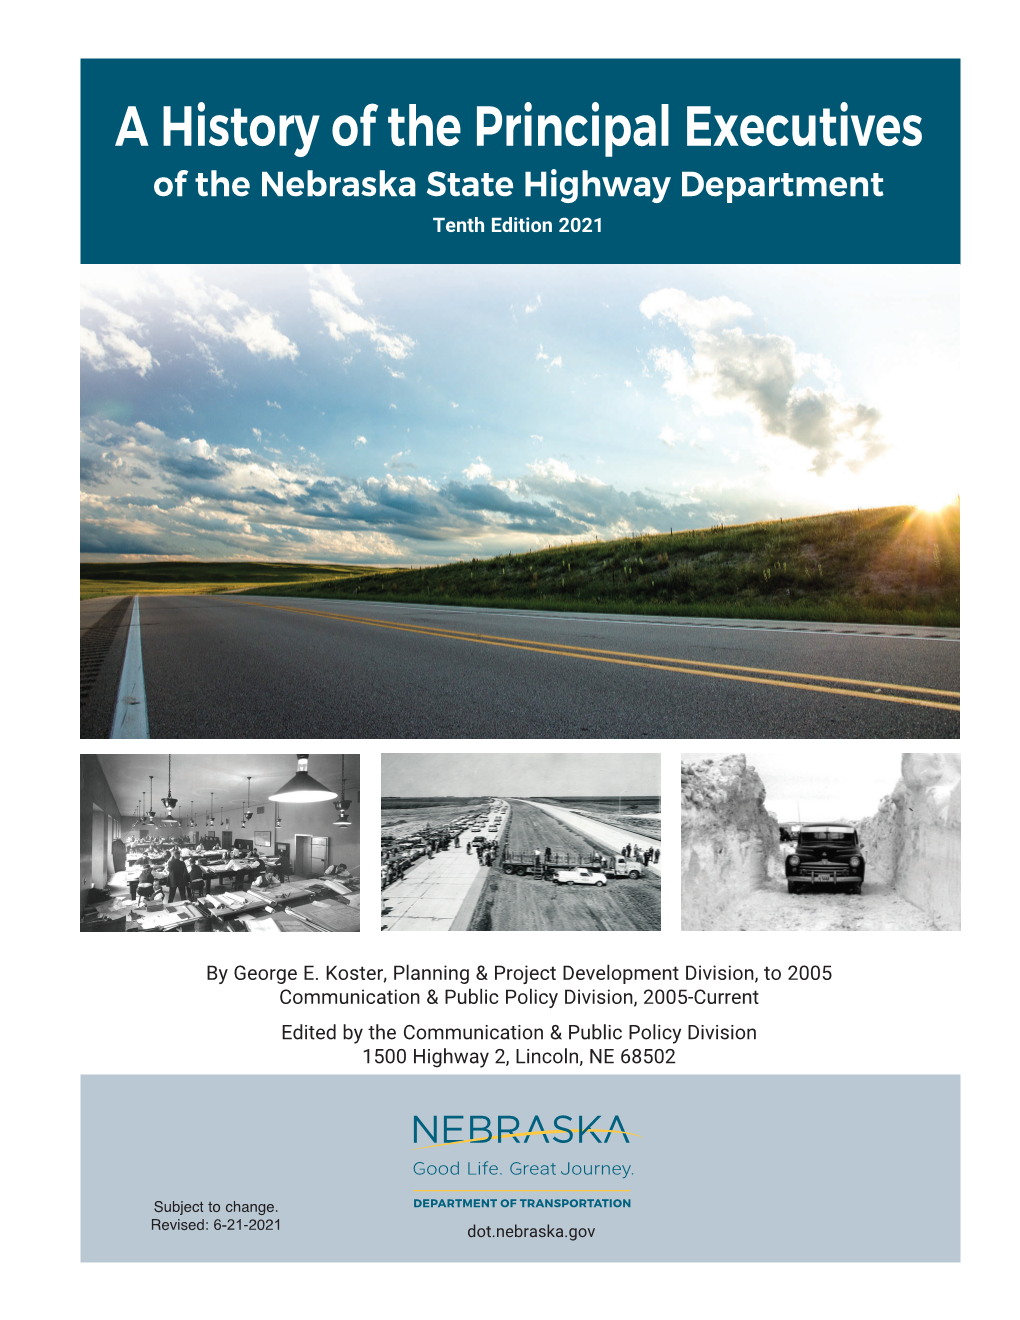 A History of the Principal Executives of the Nebraska State Highway Department Tenth Edition 2021